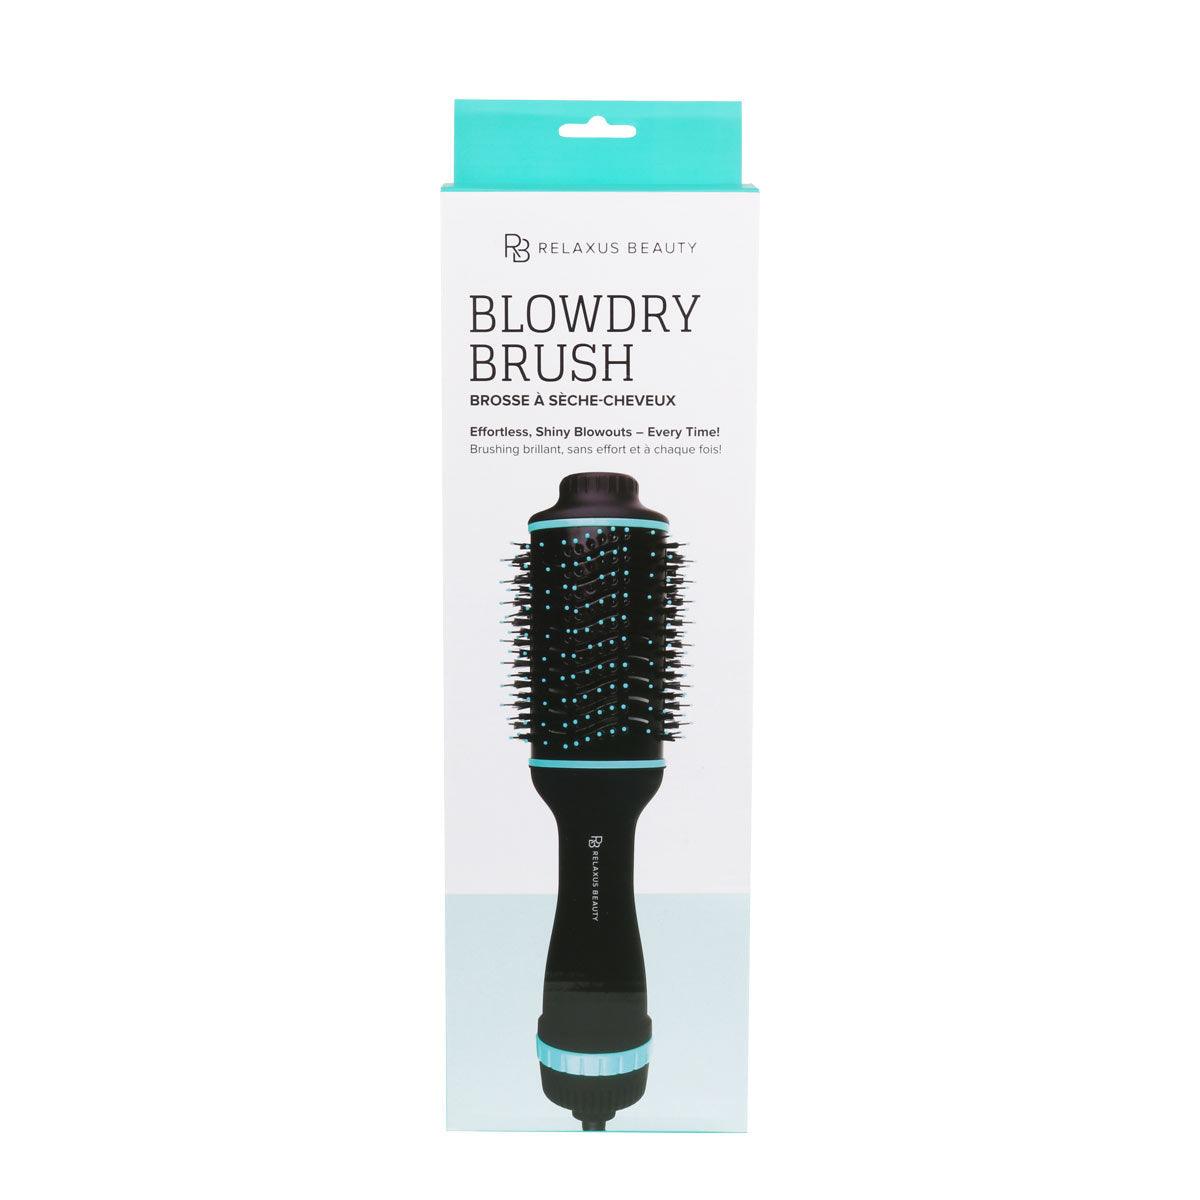 BLOWDRY BRUSH Relaxus Beauty Boutique Deauville